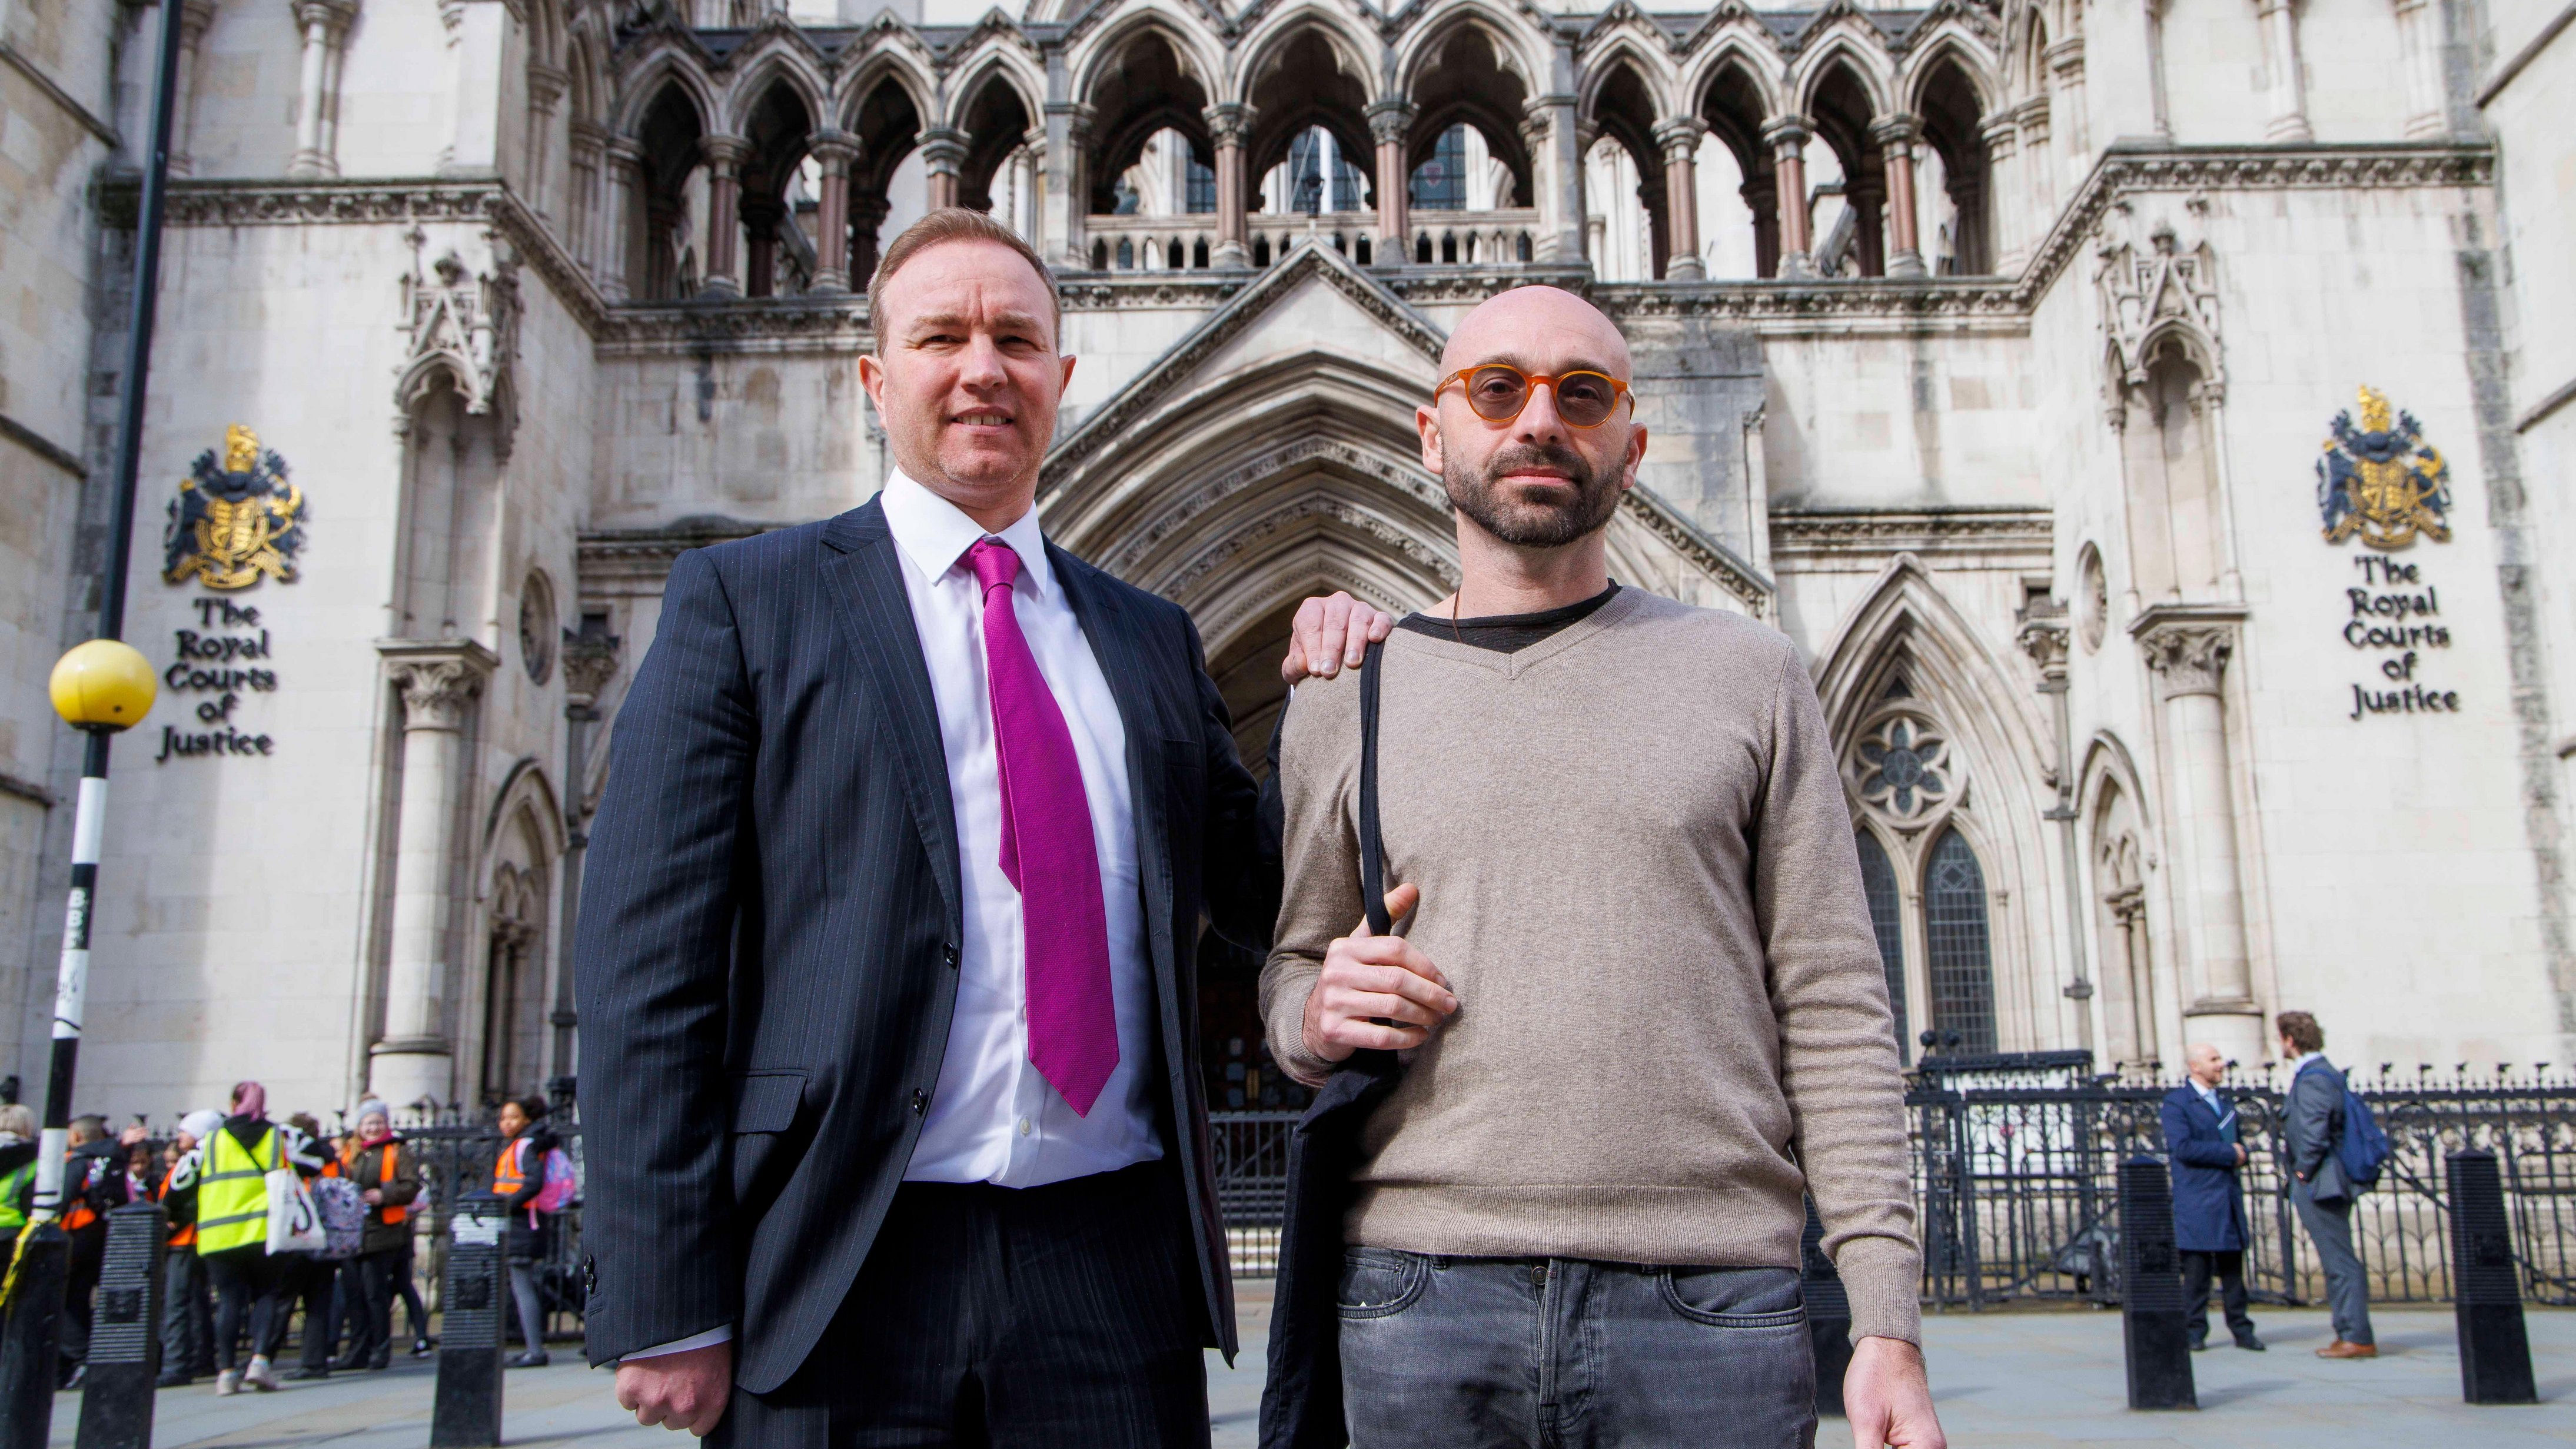 Tom Hayes and Carlo Palombo were convicted in 2015 and 2019 respectively